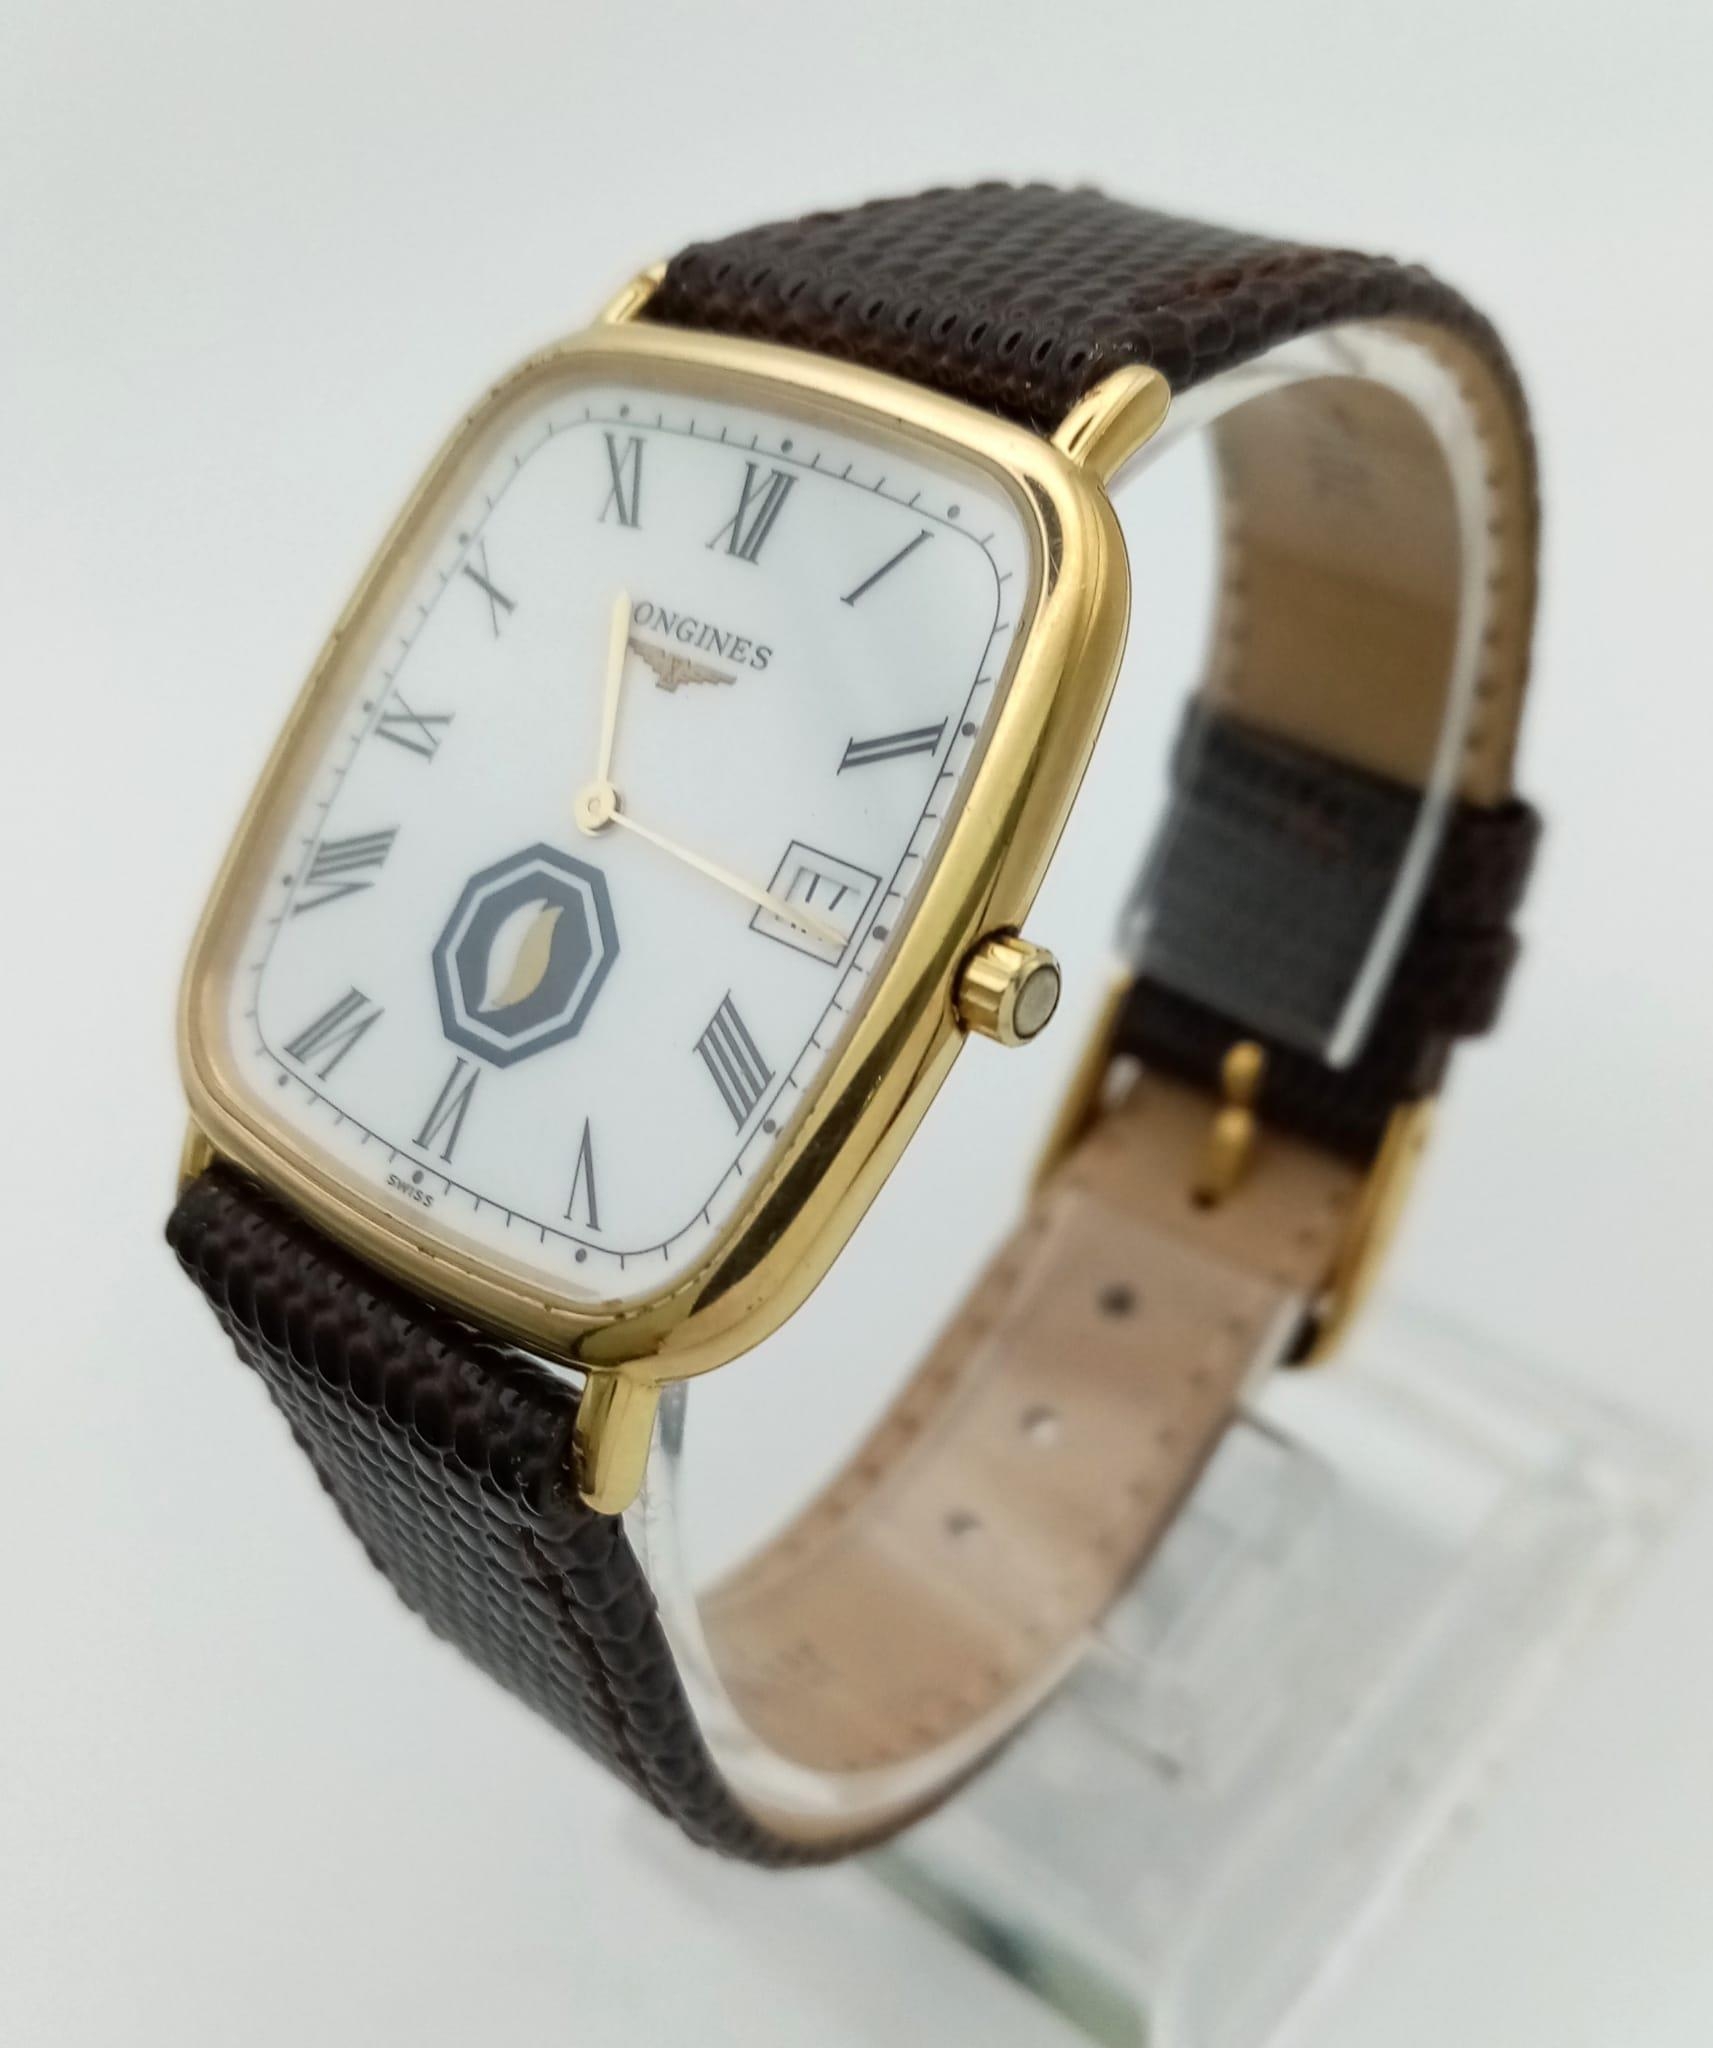 A Vintage Longines Gents Watch. Brown leather strap. Case - 30 x 30mm. White dial with date - Image 2 of 4